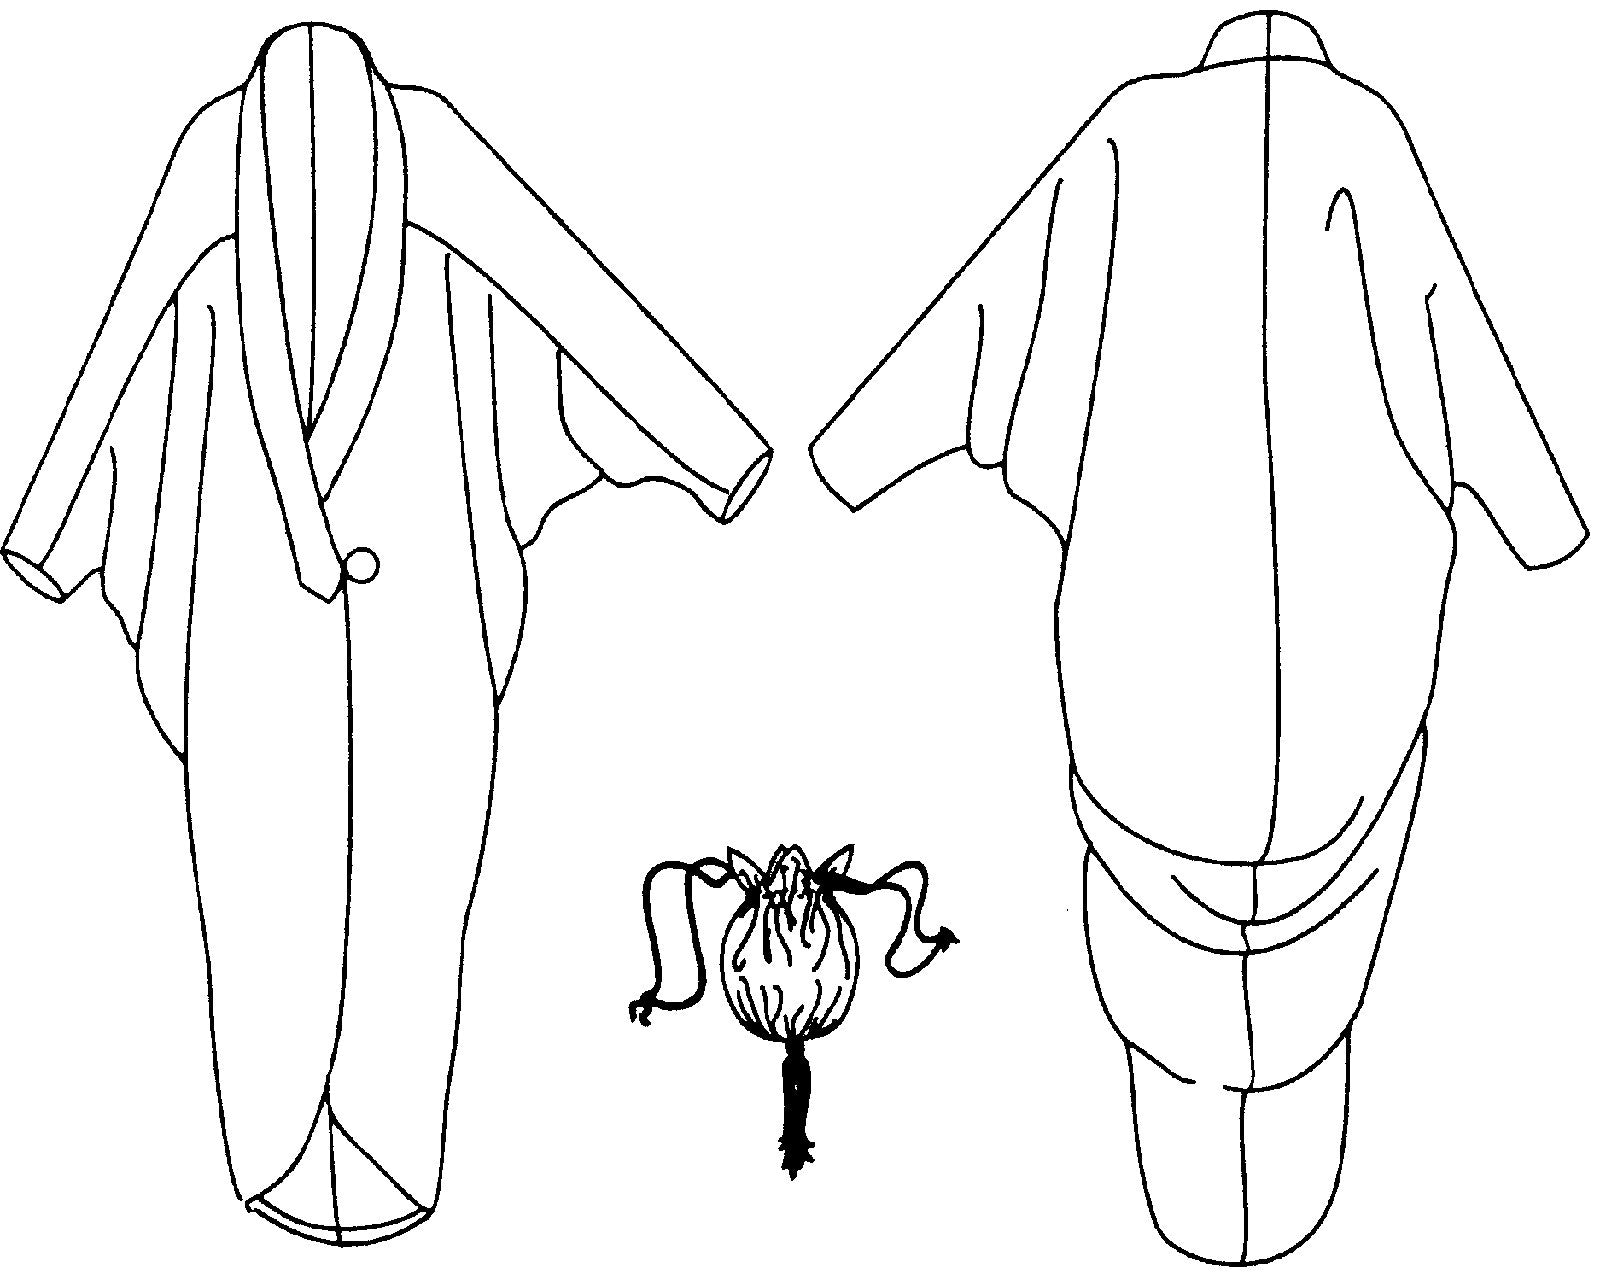 Black and White pattern drawings of front and back views of the Poiret Cocoon Coat with the drawstring bag in the bottom center